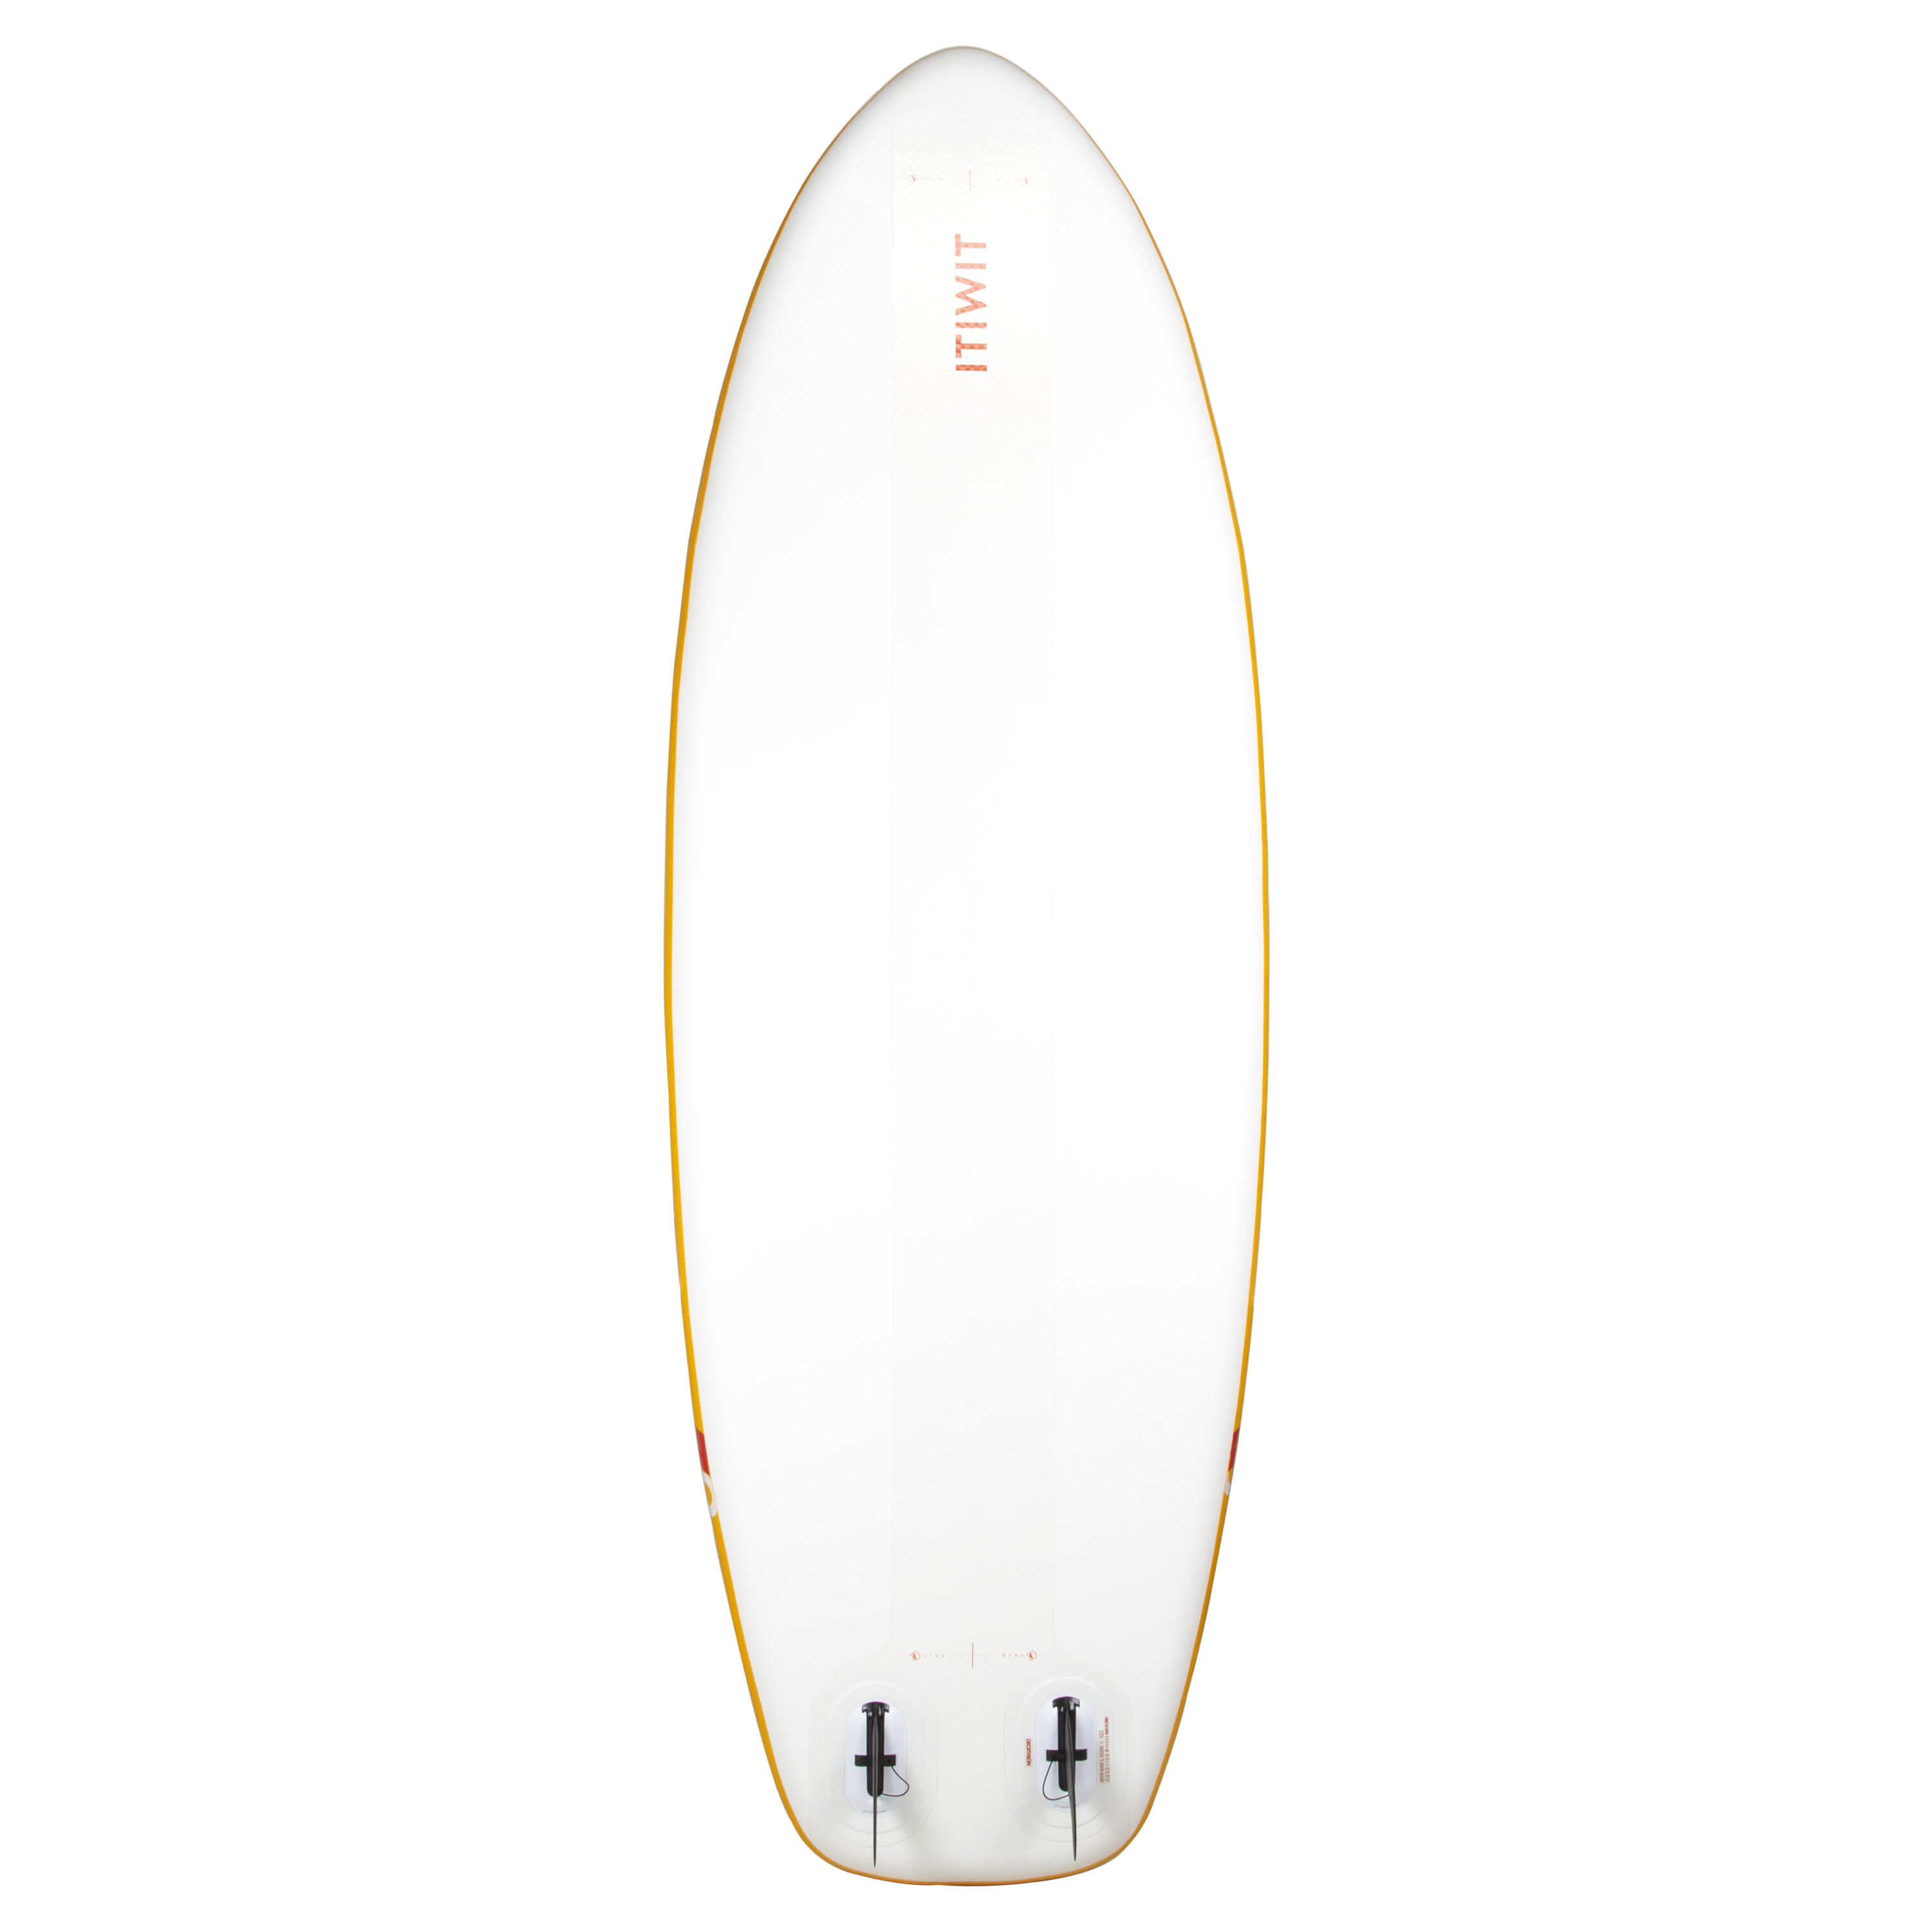 Inflatable SUP - 100 White/Yellow - ITIWIT